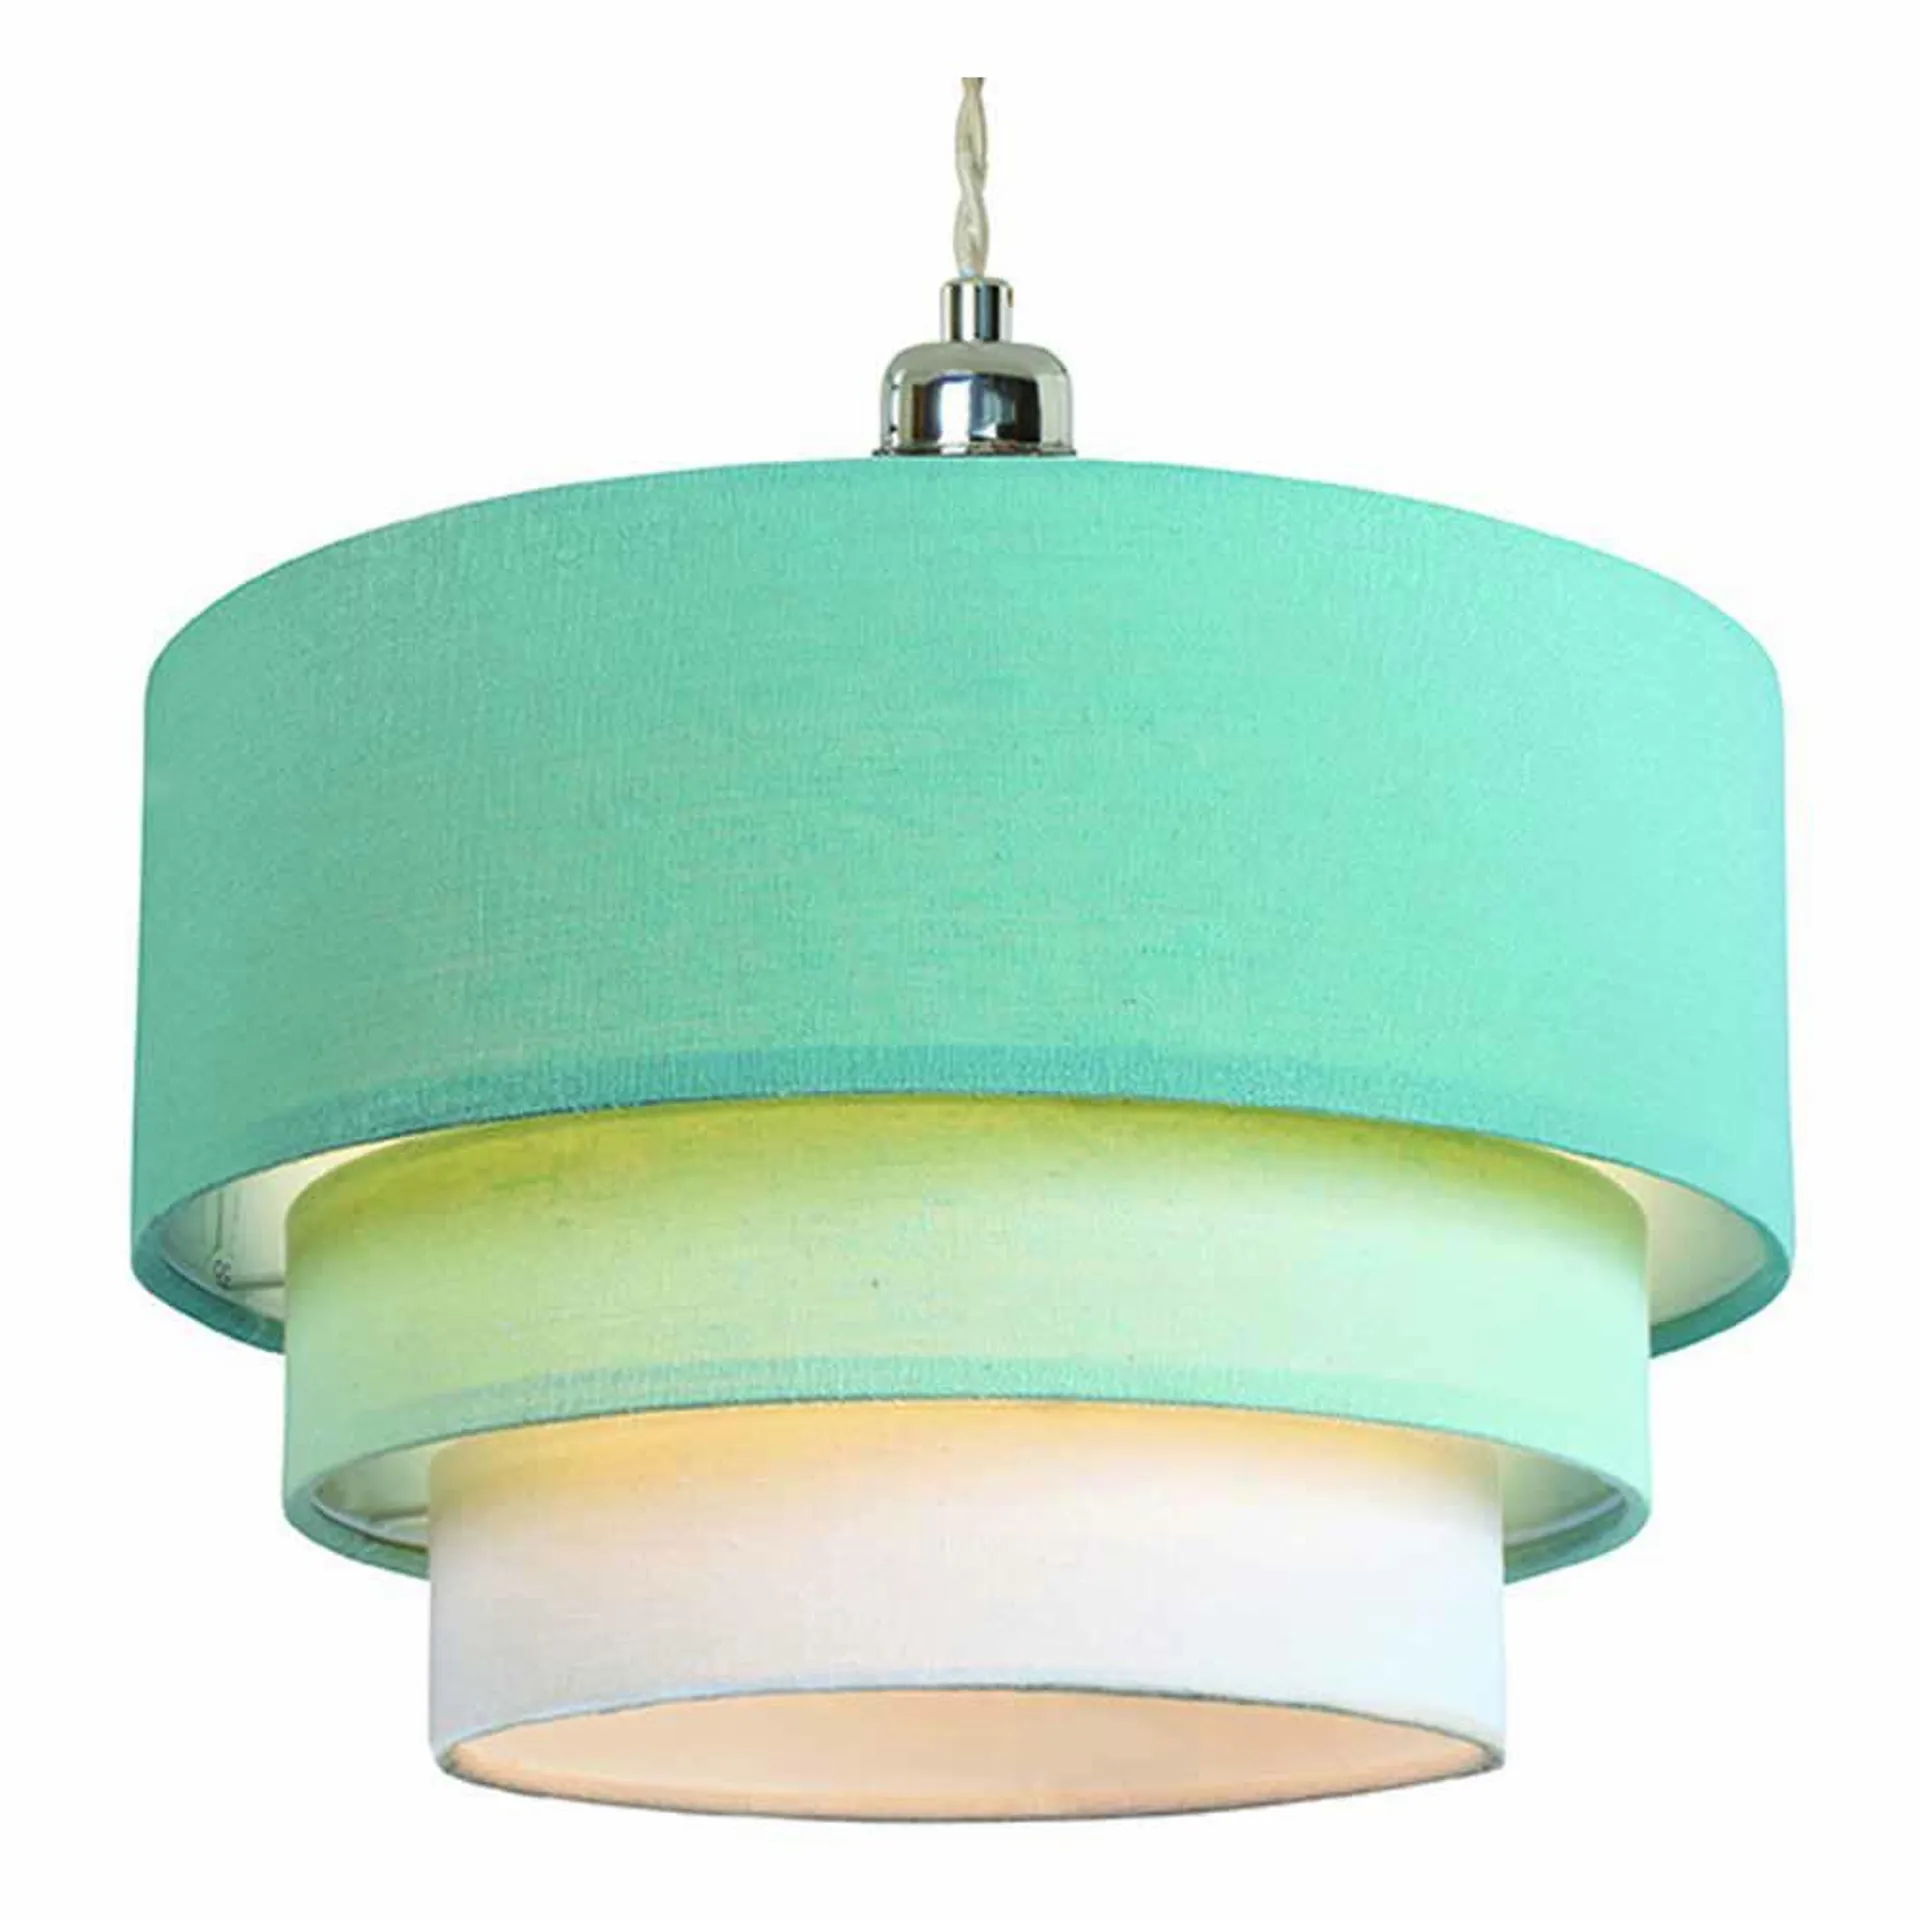 The Lighting and Interiors Duck Egg Blue 3 Tier Pendant Shade